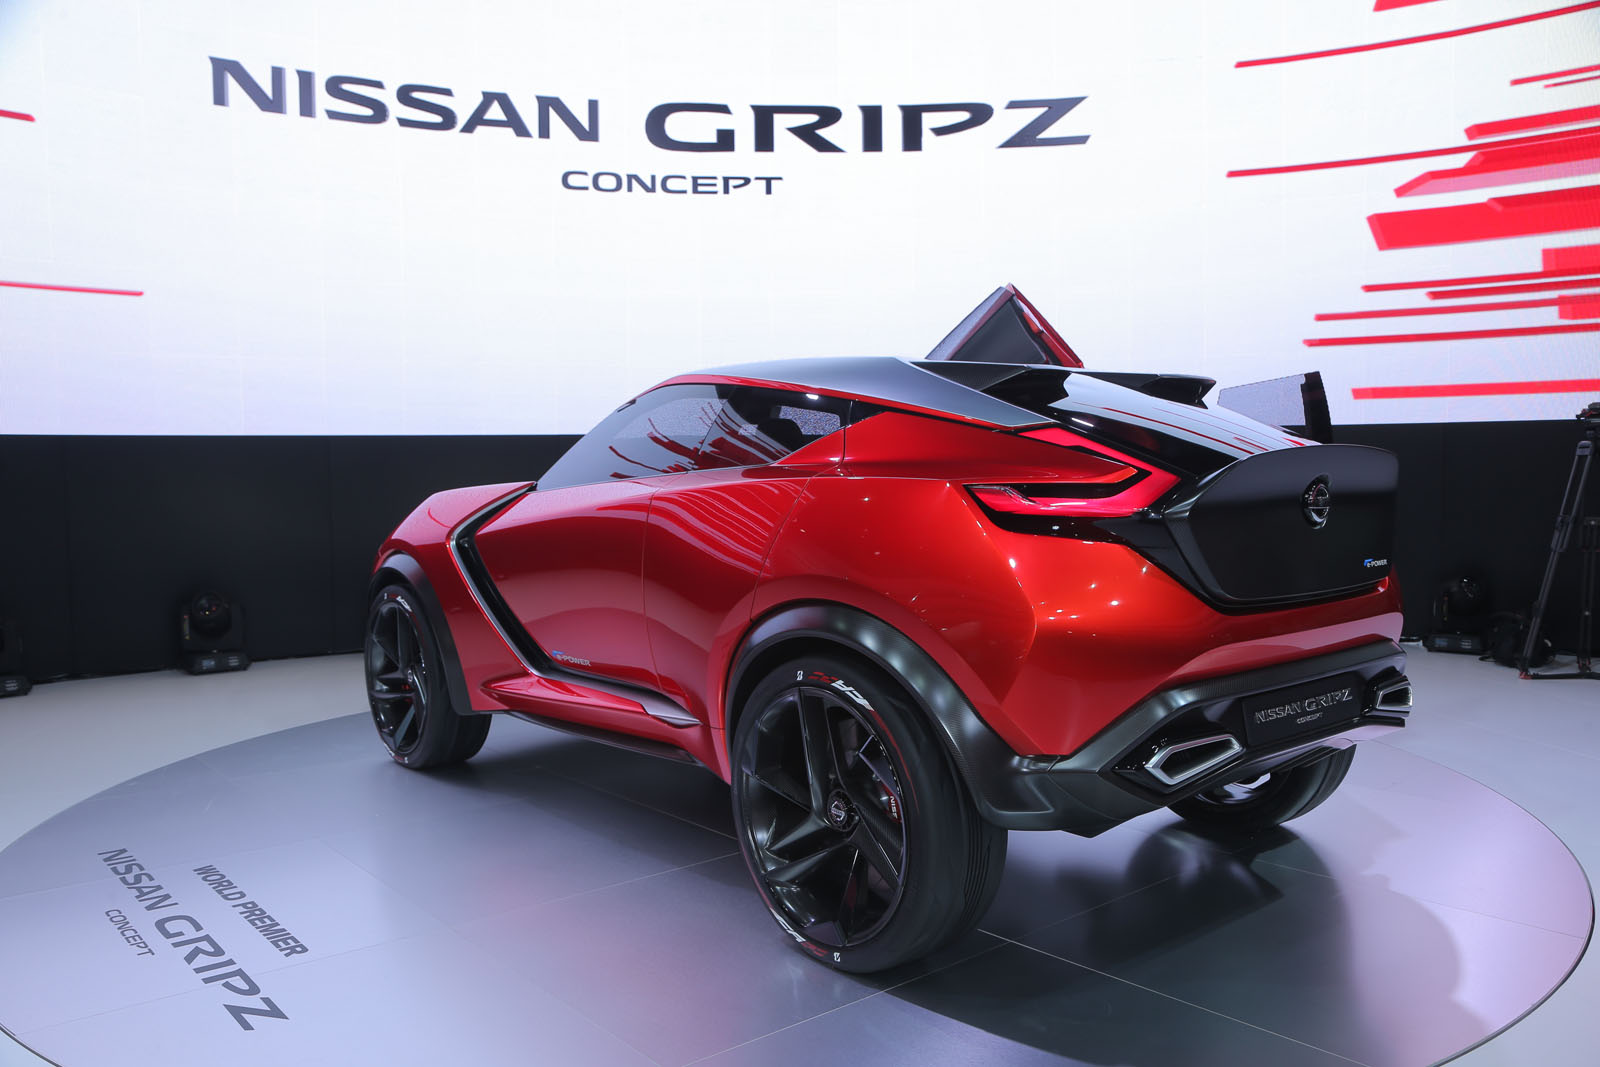 Nissan Gripz Concept: A Radical Sports Crossover